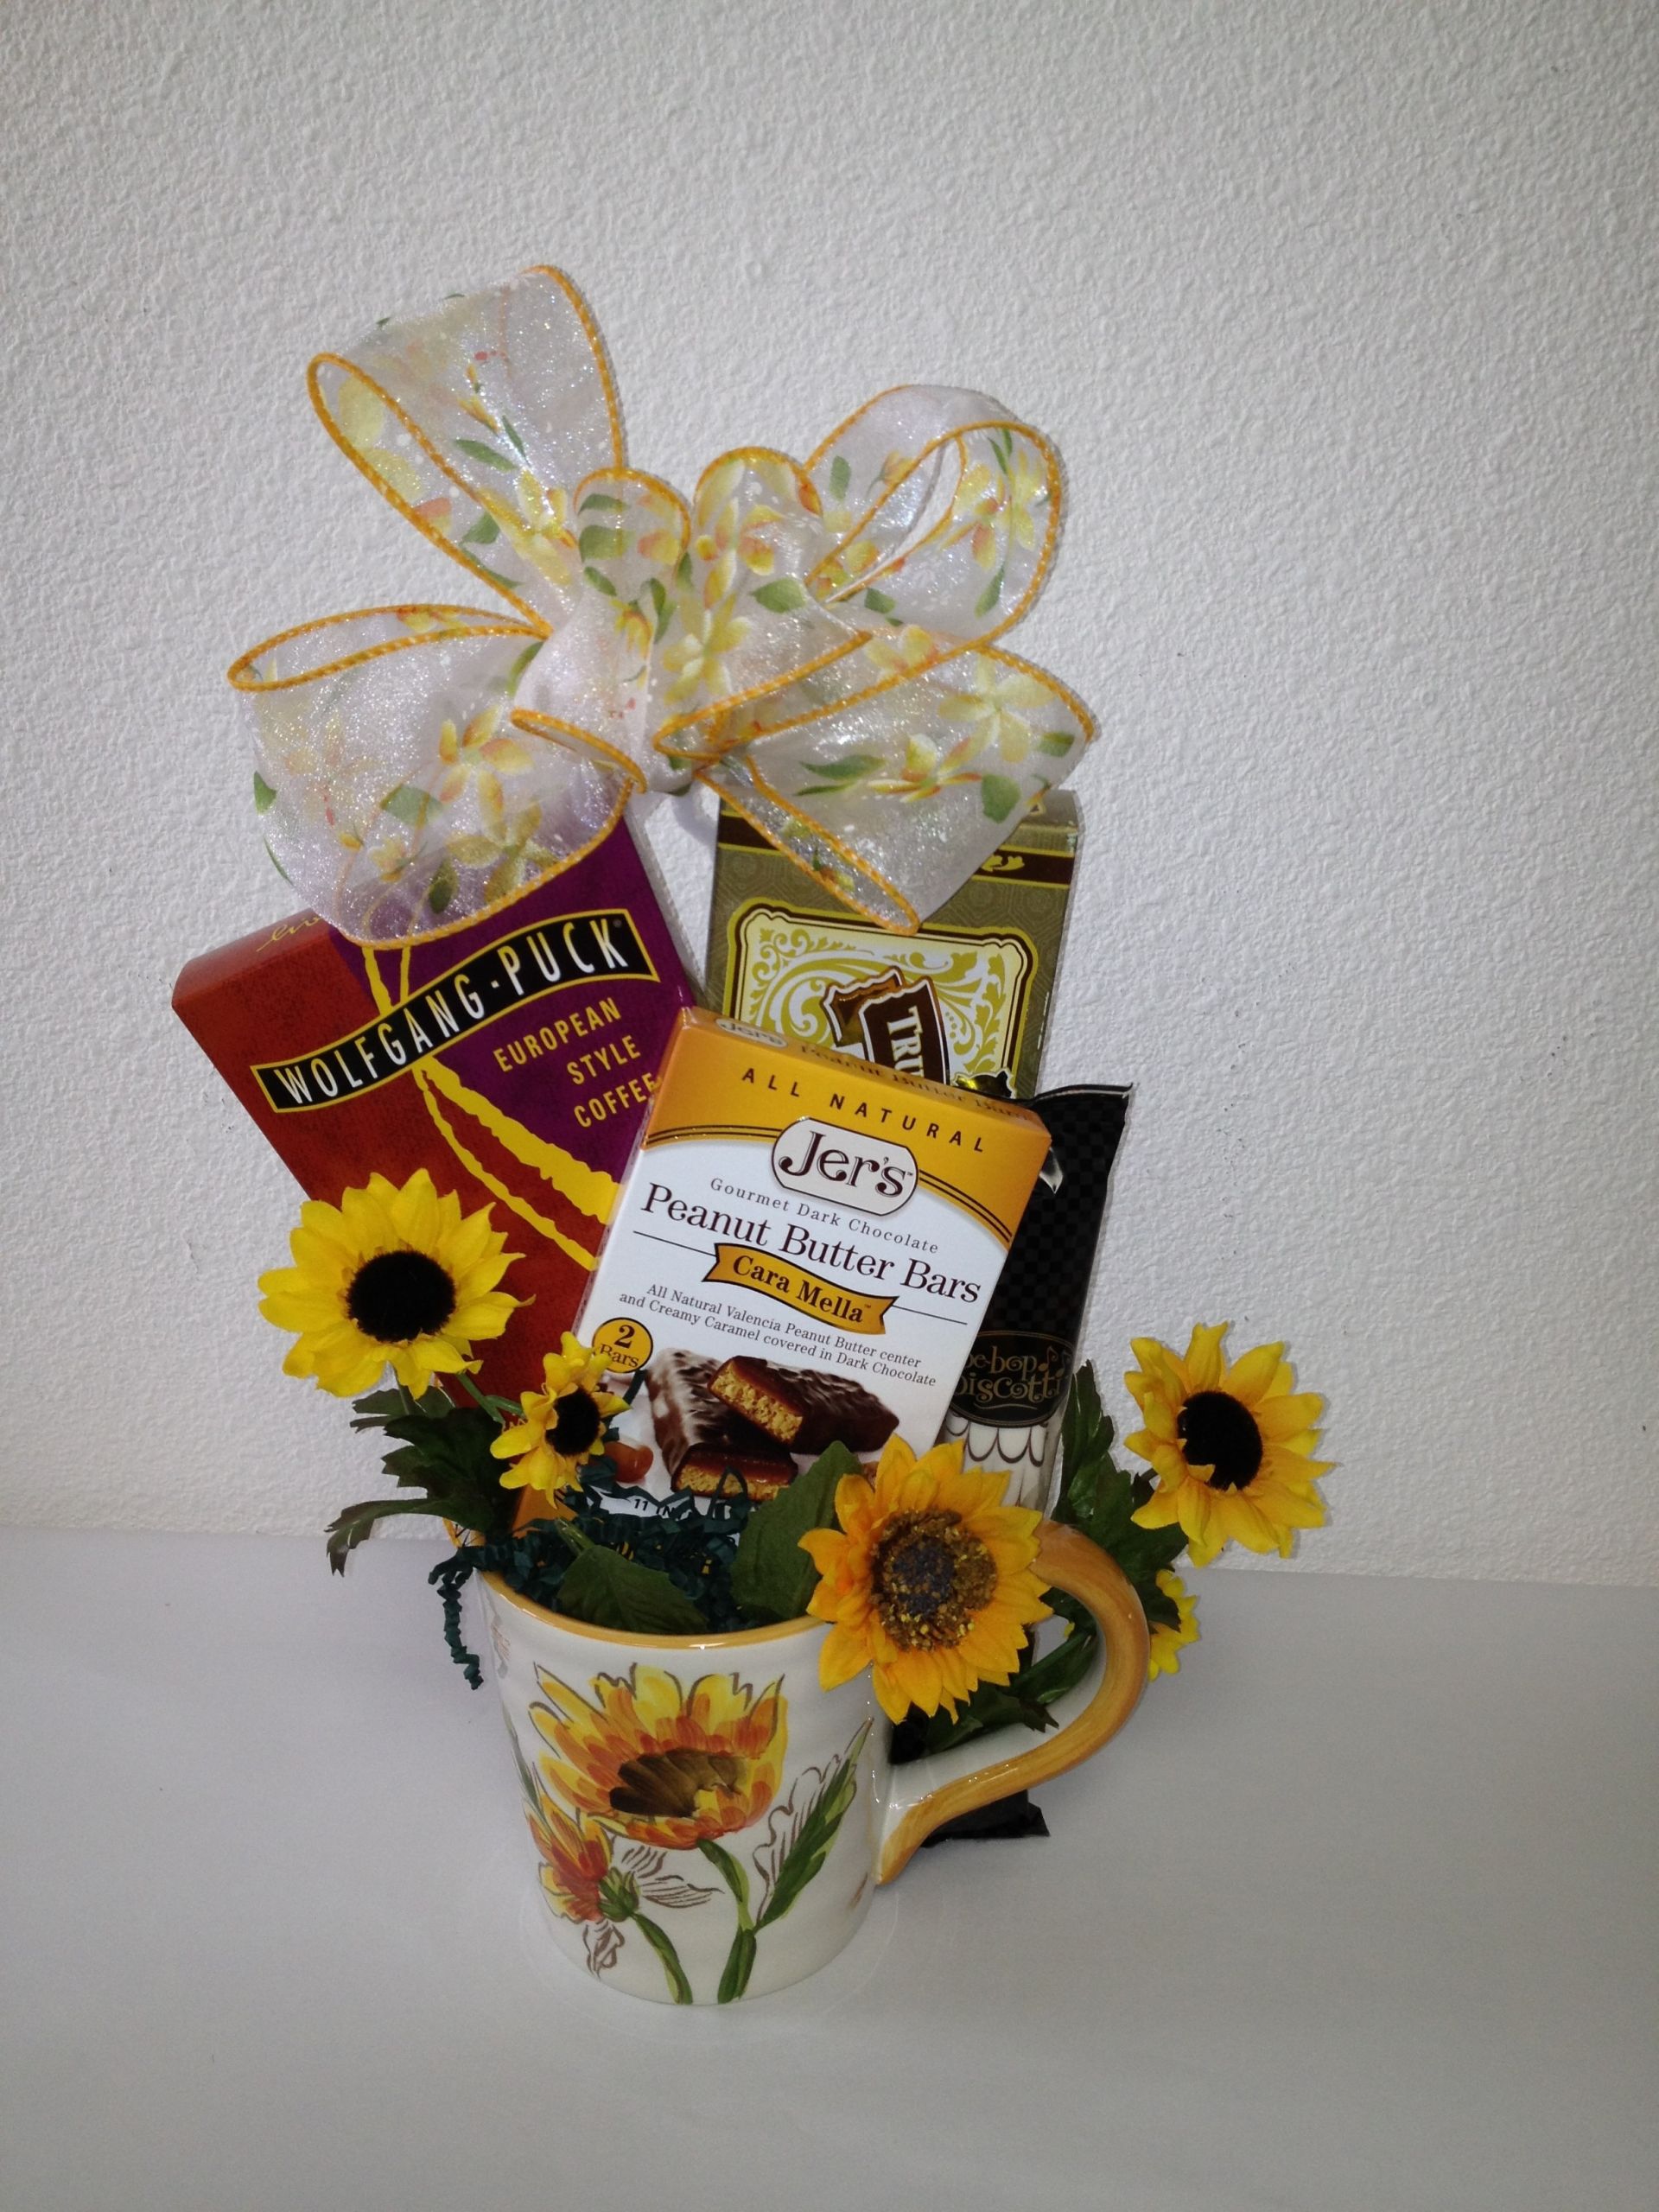 Small Gift Baskets Ideas
 Inexpensive Mother s Day Gift Baskets